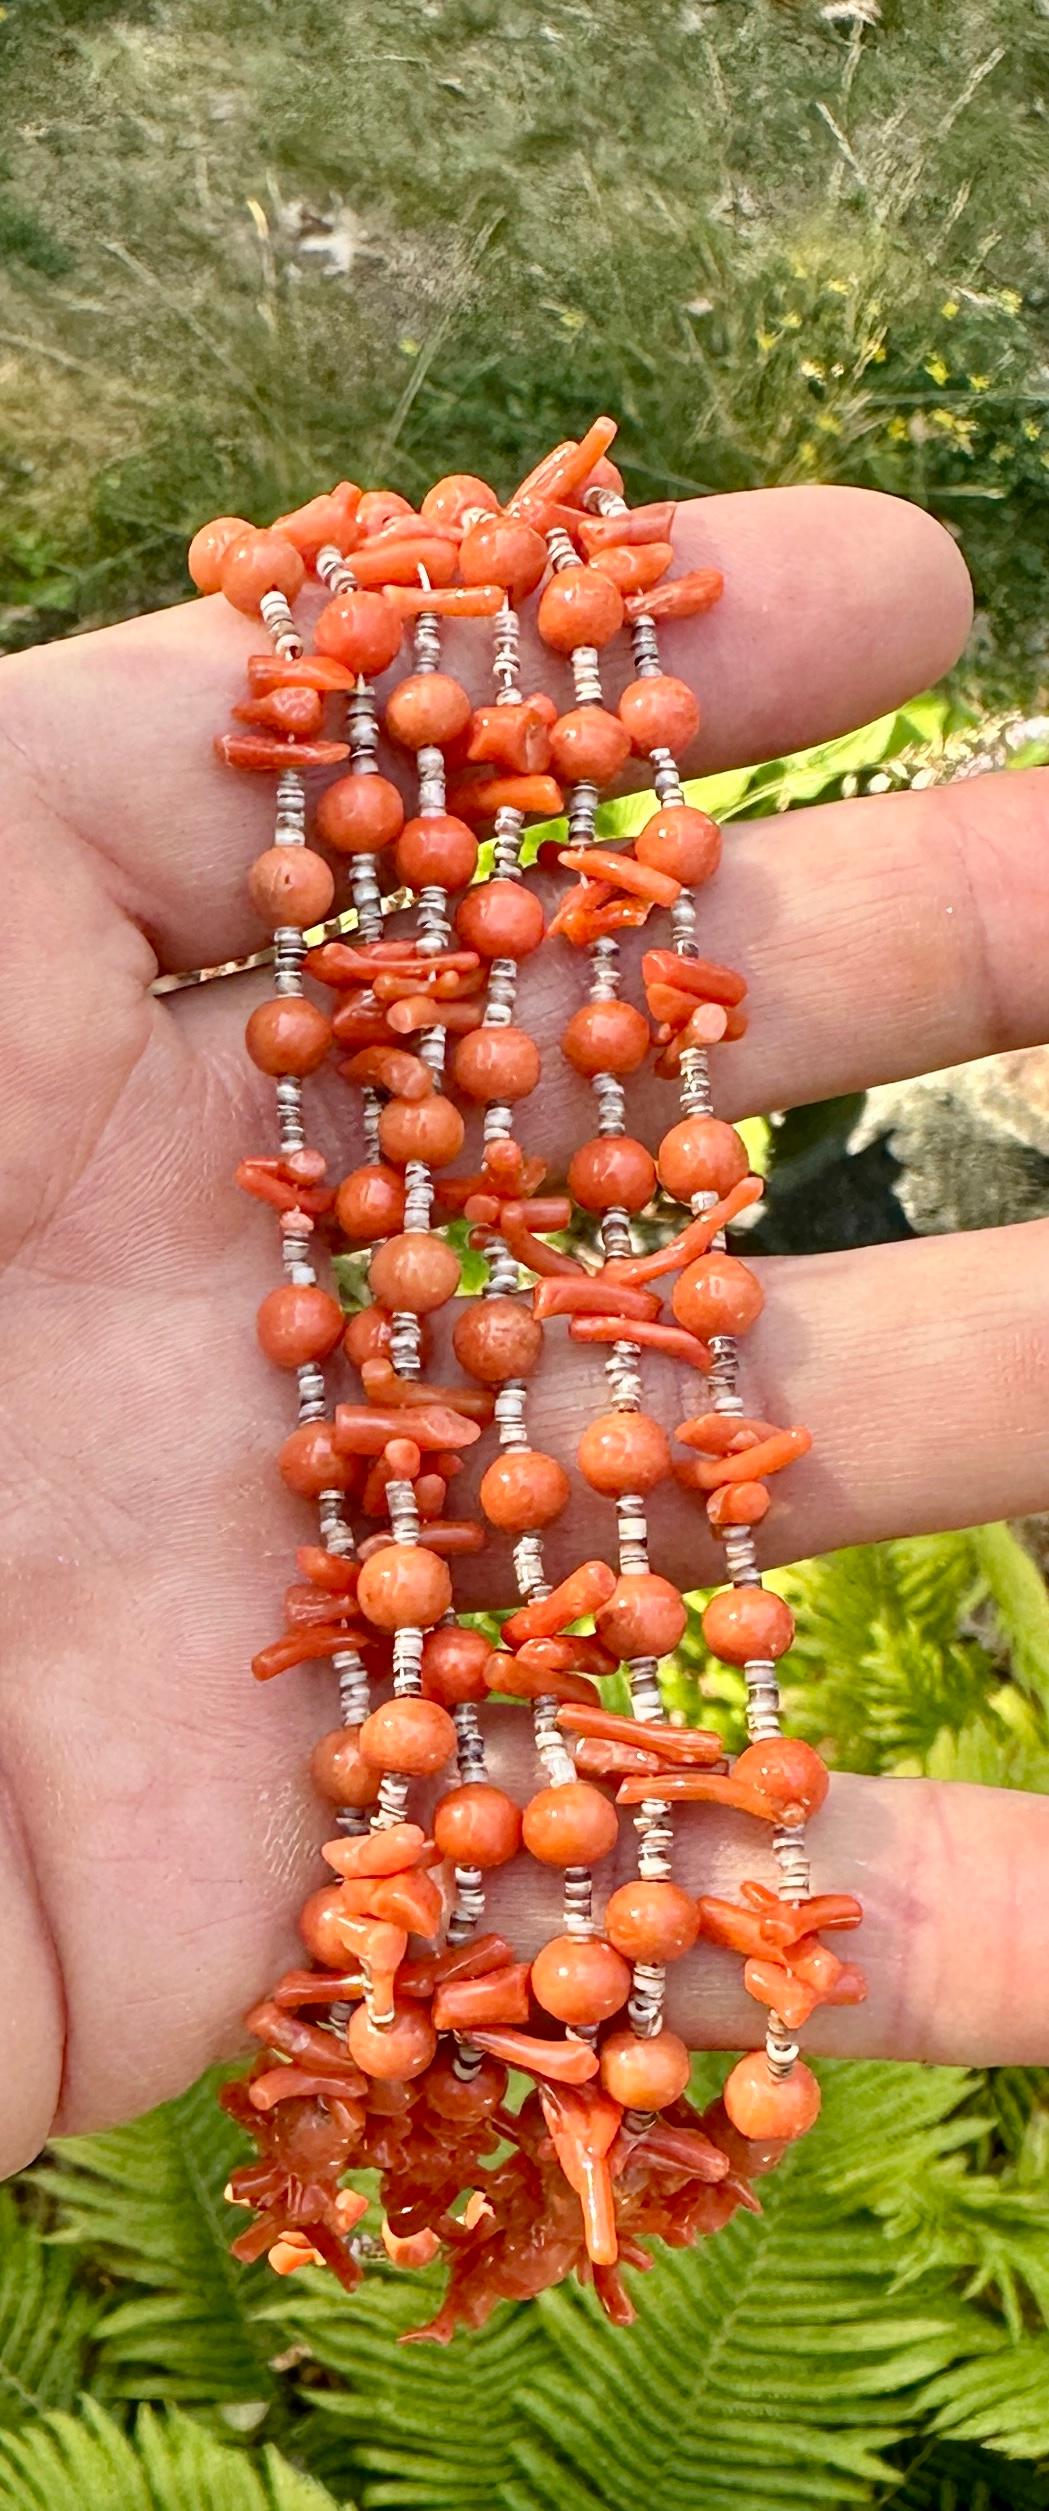 THIS IS A MAGNIFICENT ANTIQUE NATIVE AMERICAN INDIAN RED MOMO CORAL THREE STRAND NECKLACE WITH RARE ROUND CORAL BEADS AND BRANCH CORAL BEADS WITH TINY HEISHI BEADS.  THE VERY RARE HAND MADE NECKLACE IS ABSOLUTELY STUNNING WITH THE GORGEOUS NATURAL